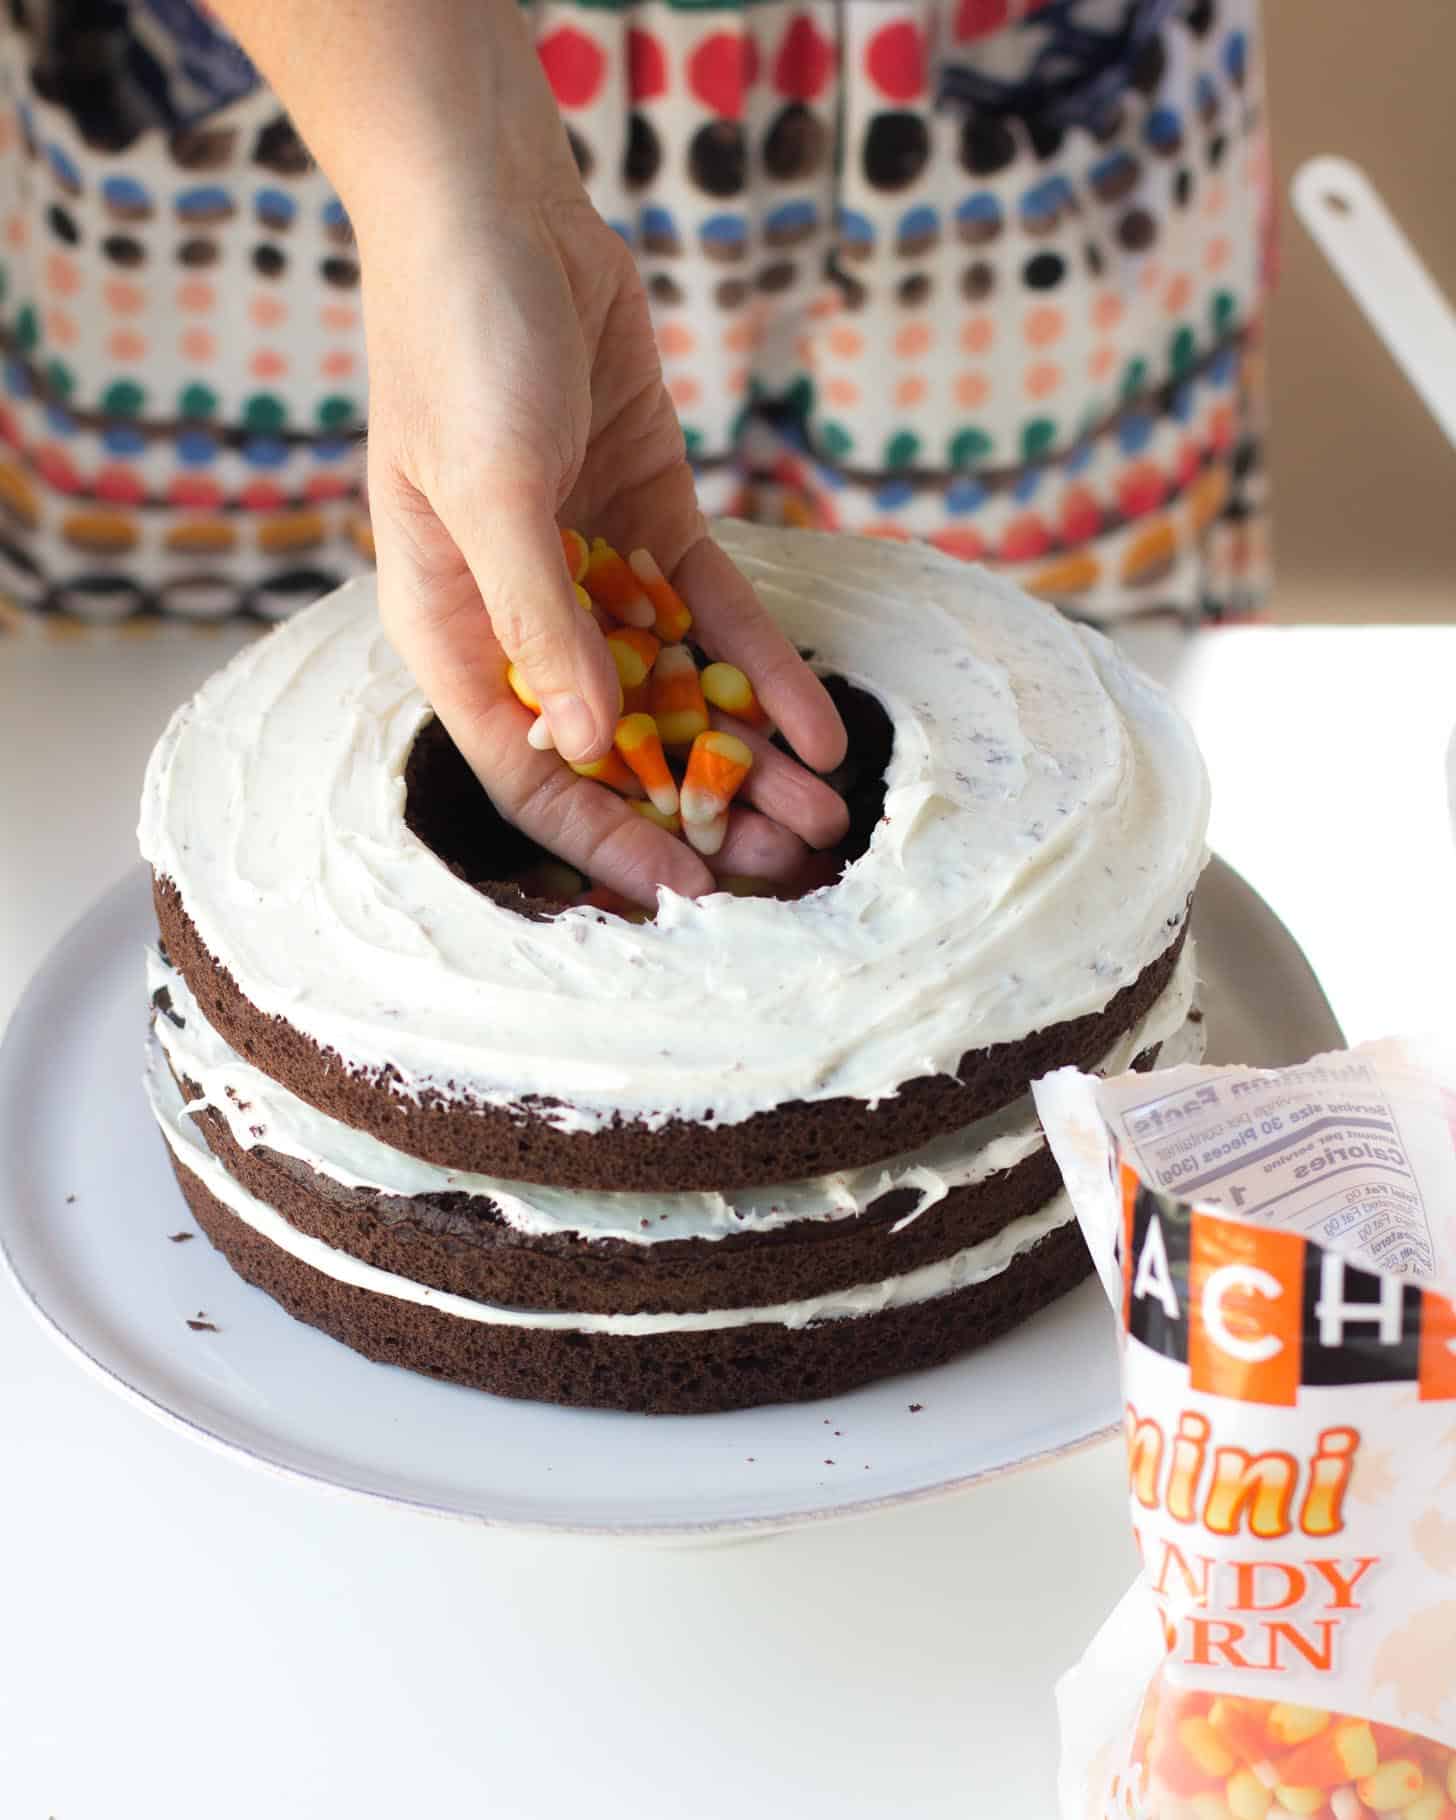 adding candy corn to the center of the pinata cake